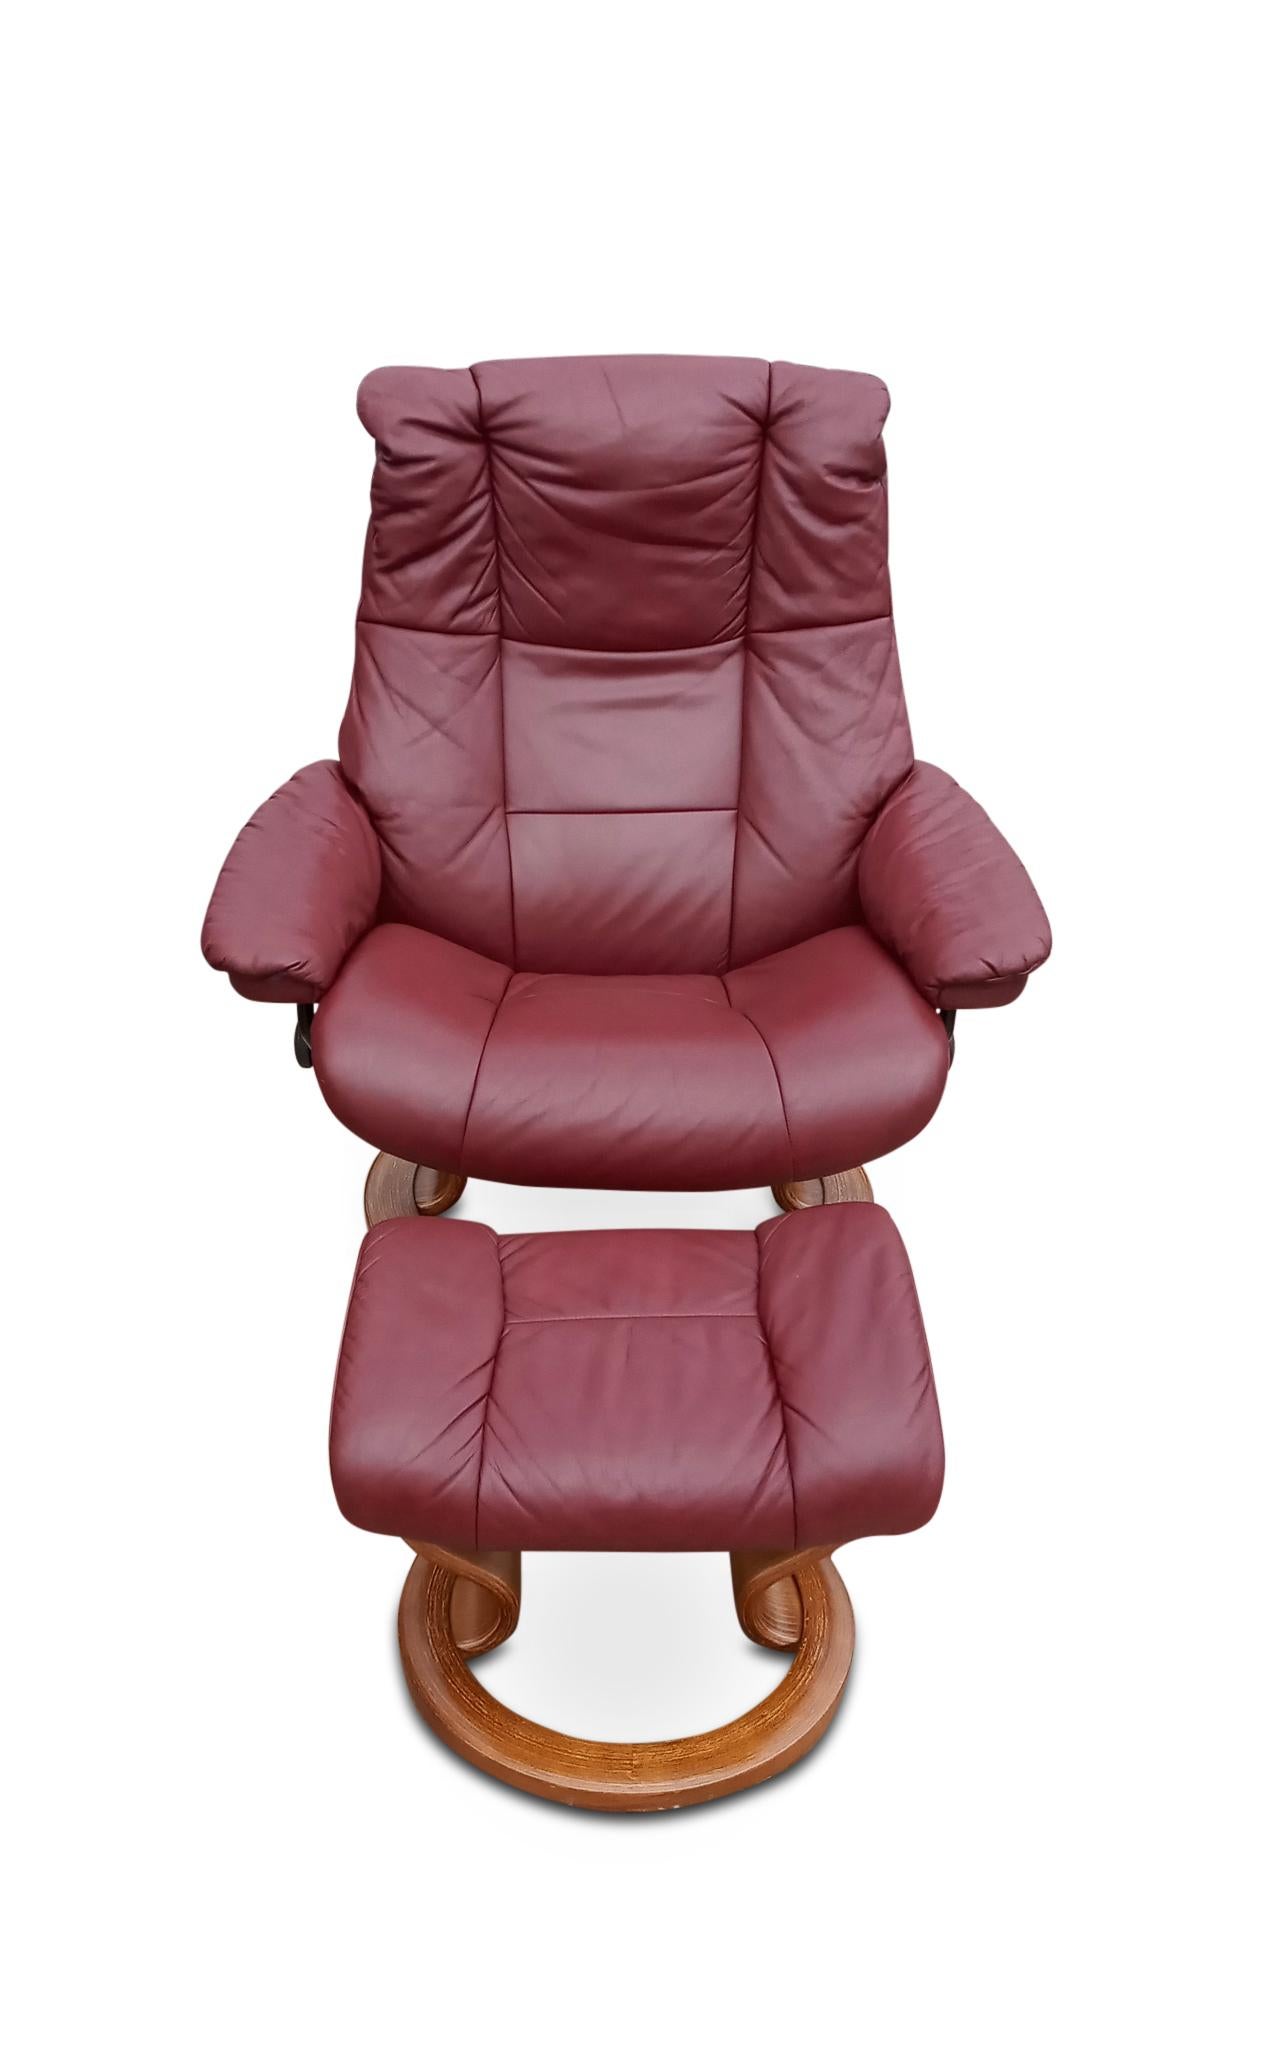 burgundy leather recliner chairs